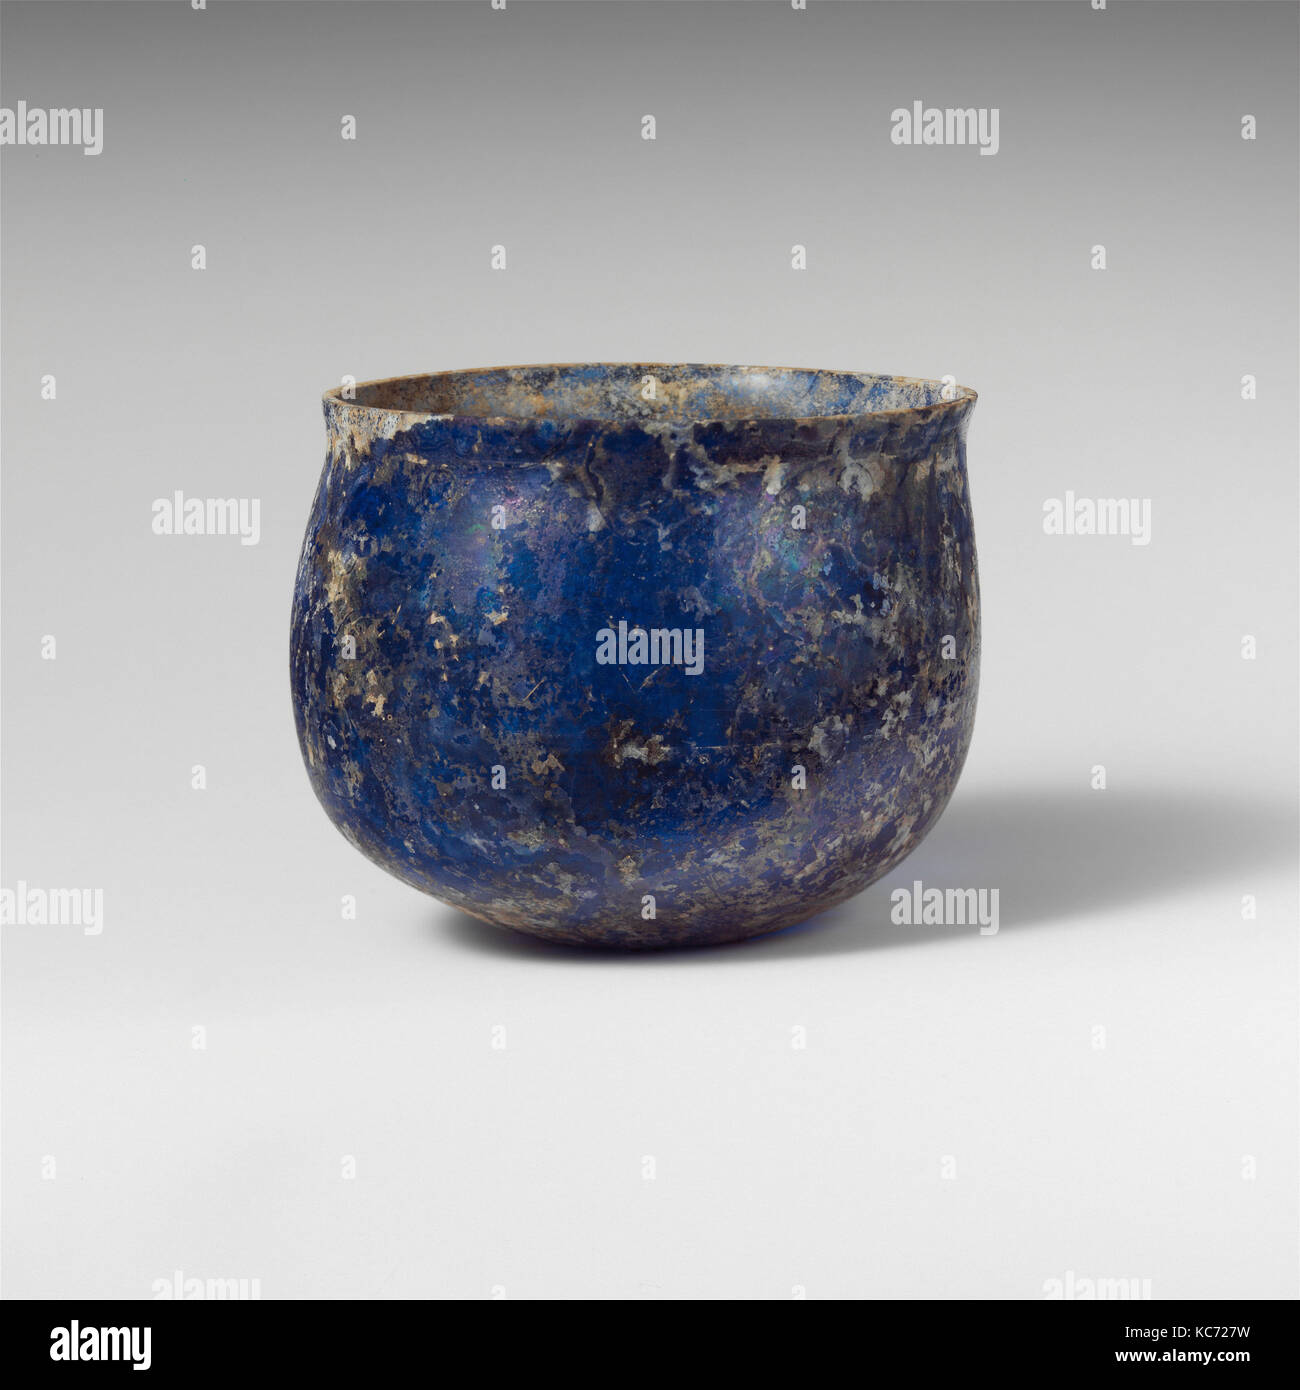 Glass cup, Early Imperial, 1st century A.D., Roman, Glass; blown and cut, 2 1/2 in. (6.4 cm), Glass, Translucent blue. Knocked Stock Photo